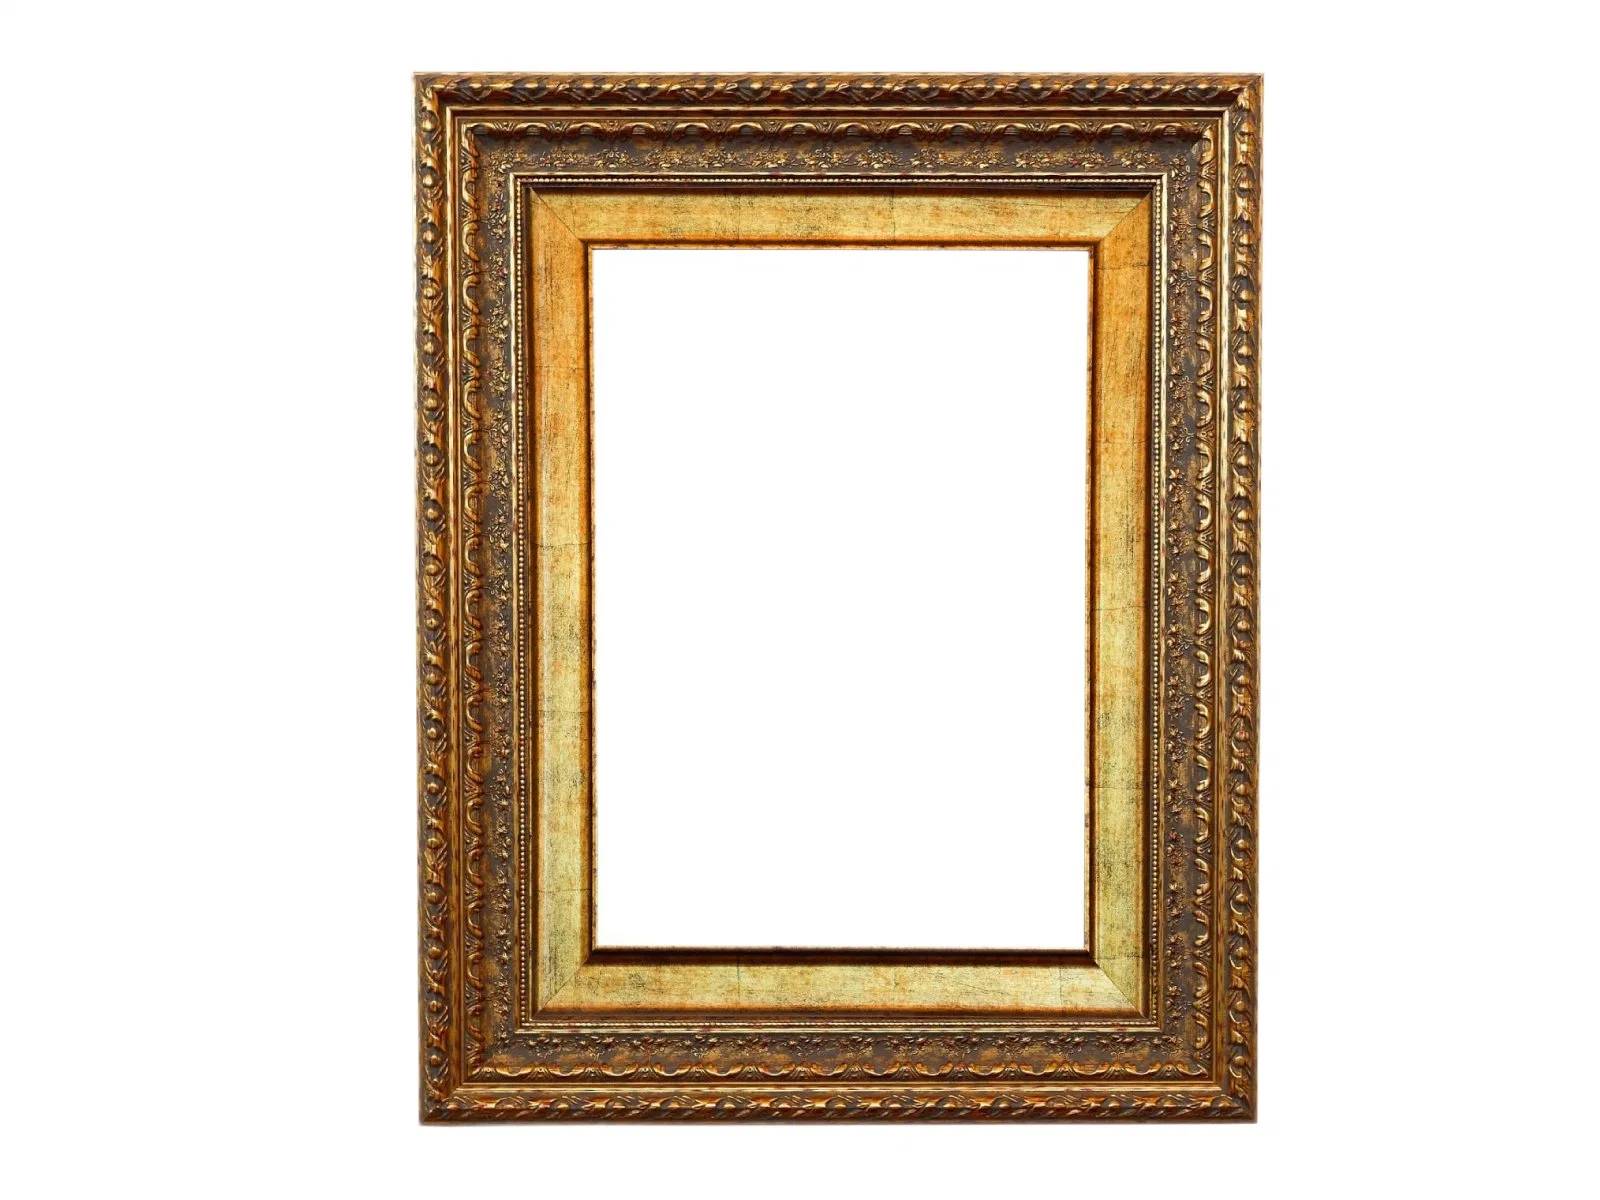 Wood Photo Picture Frames Wholesale/Supplier Decorative Homepromotion Display Promotional Gift Metal PS MDF